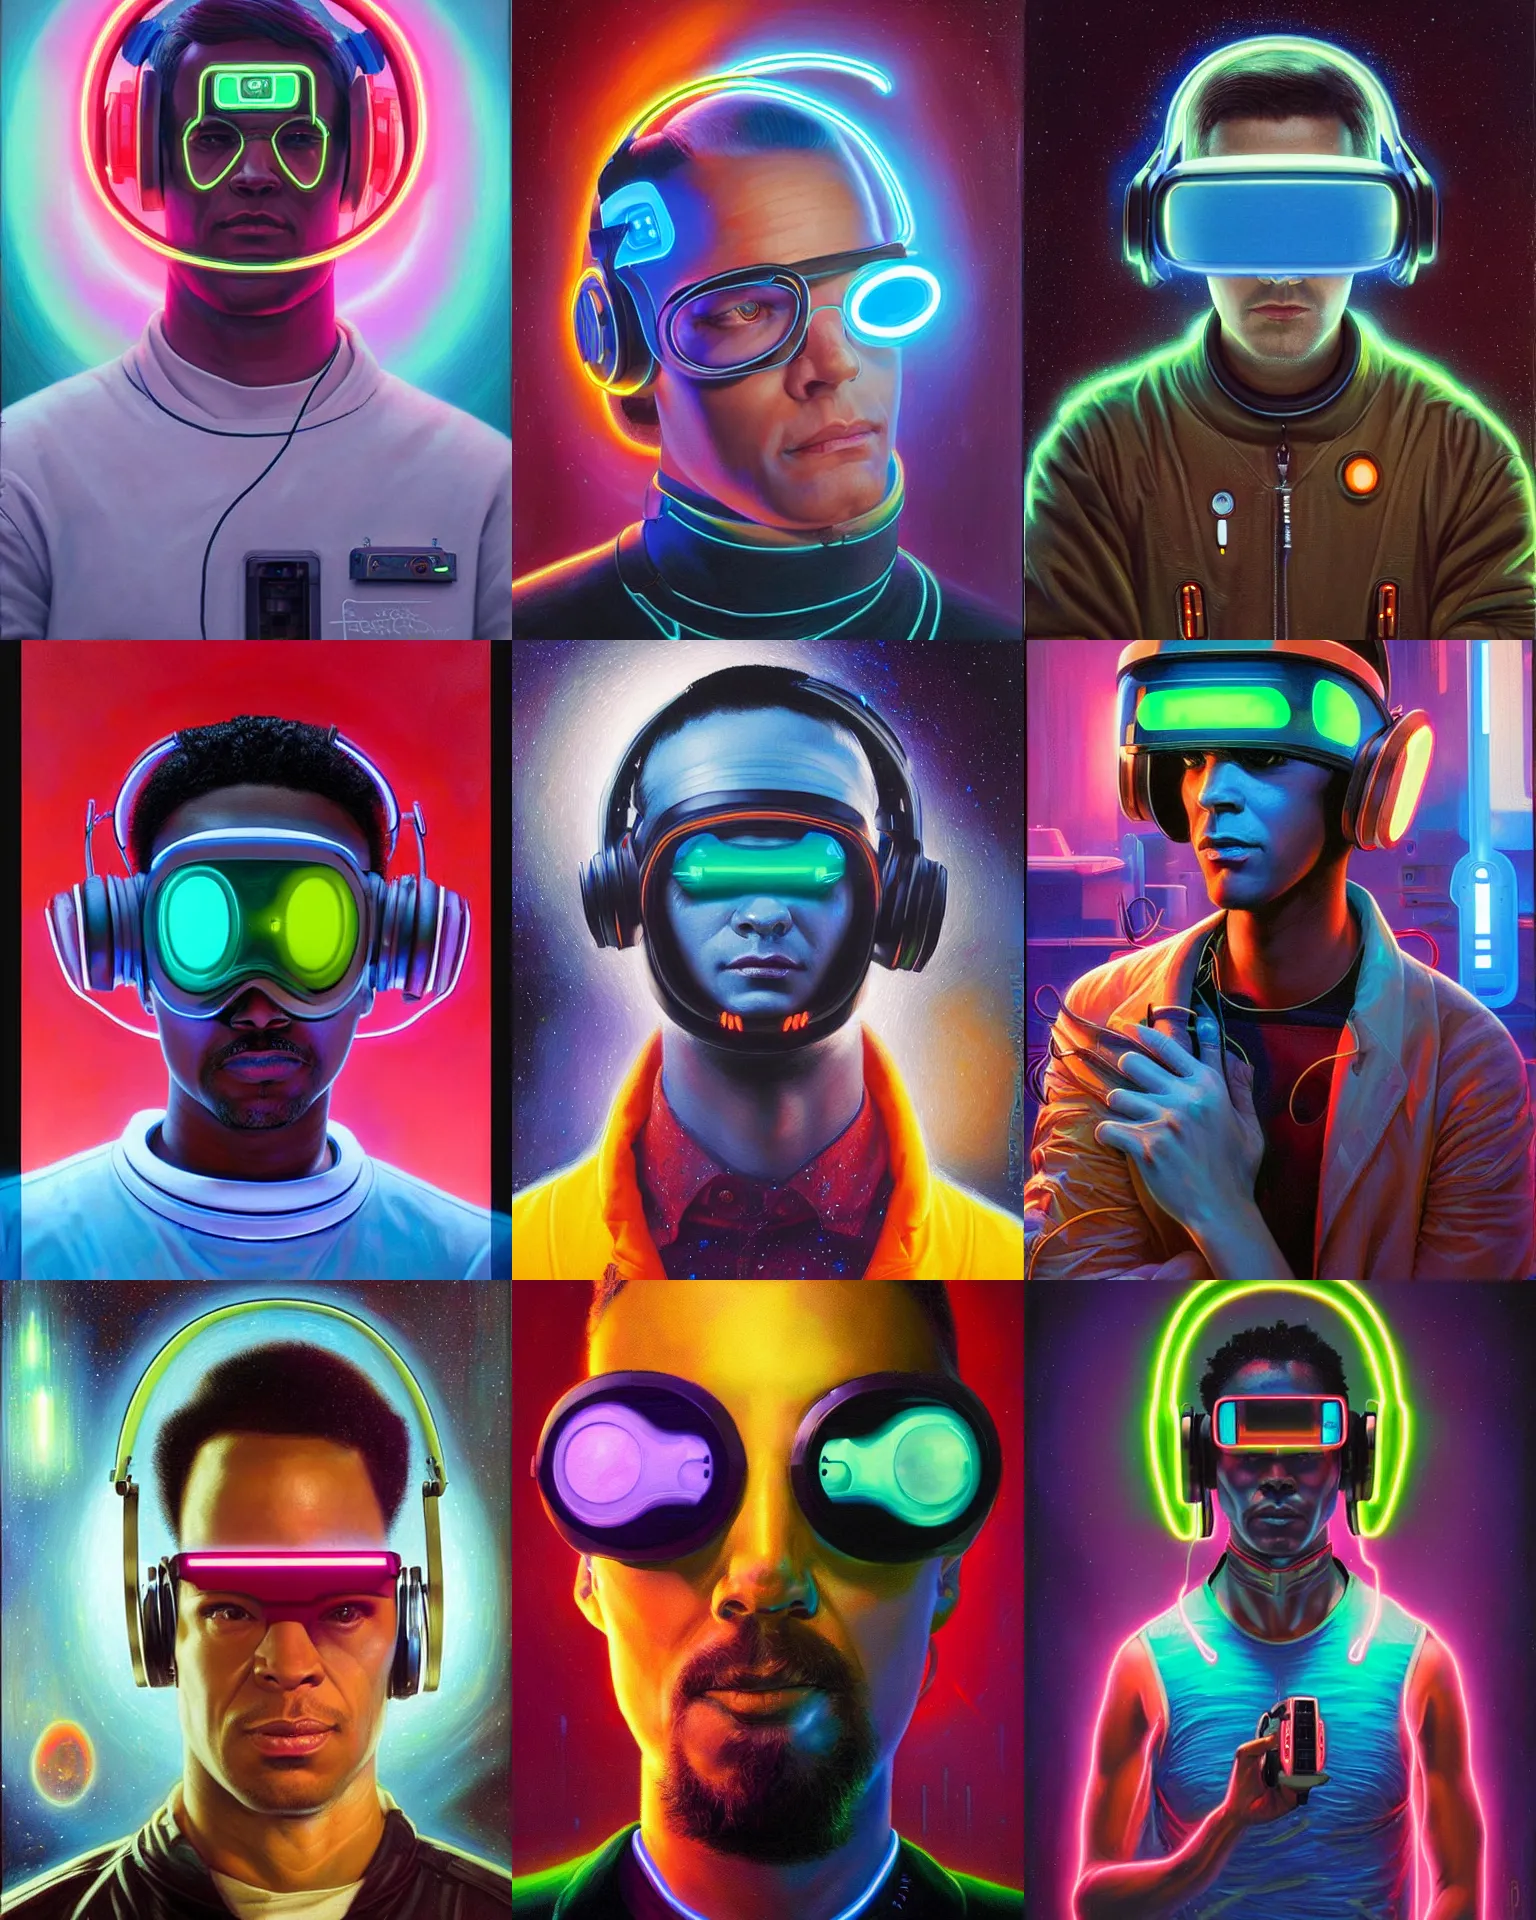 Prompt: neon cyberpunk artist with glowing geordi cyclops visor over eyes and sleek headphones headshot desaturated portrait painting by donato giancola, dean cornwall, rhads, tom whalen, alex grey astronaut fashion photography